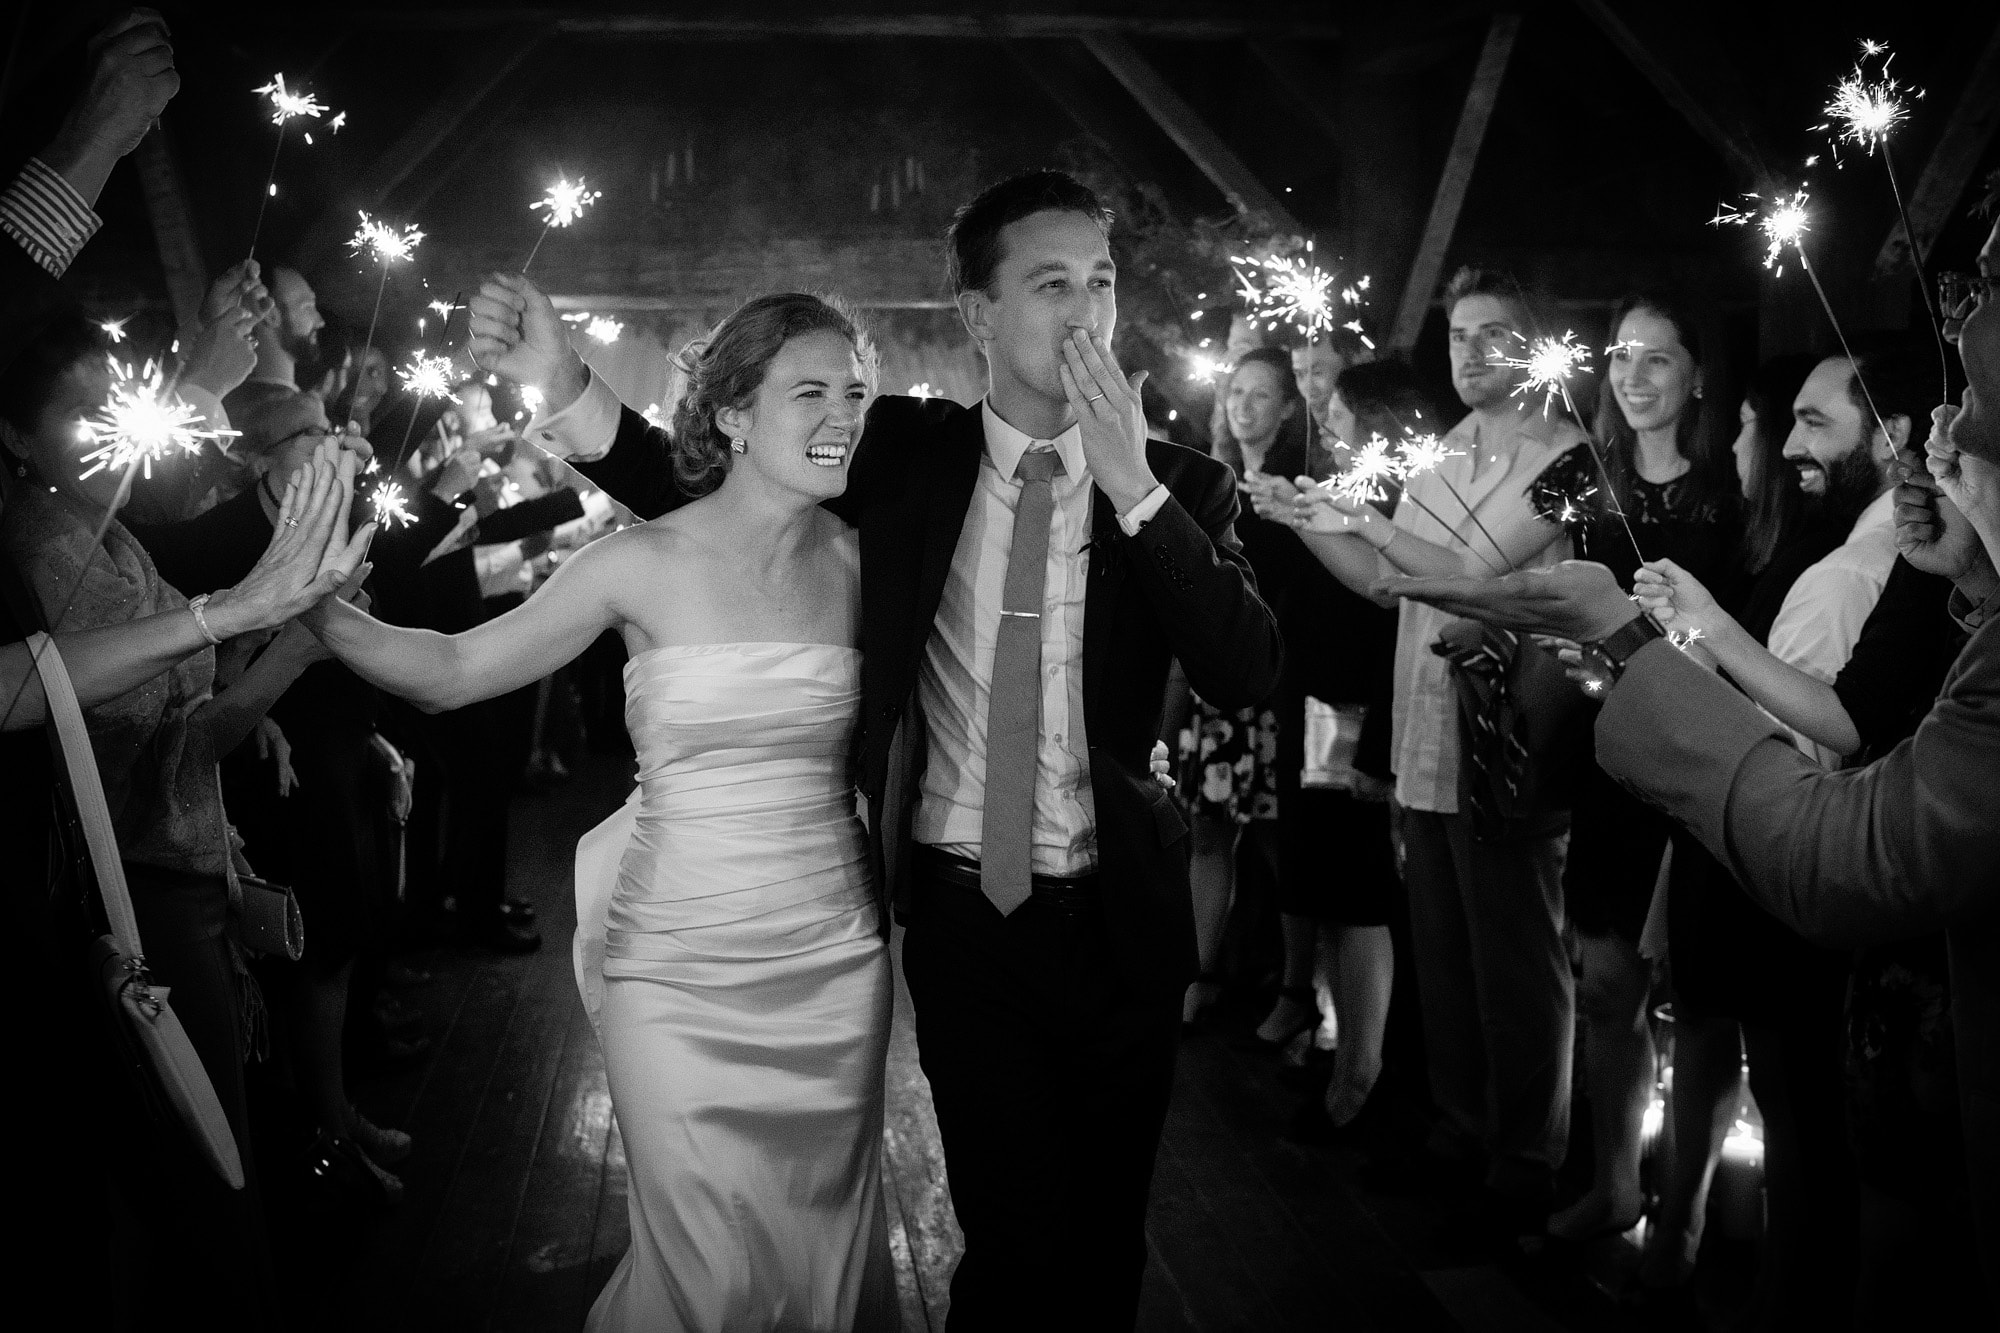 A Wedding Photographer’s Review of the Sony A9 Camera for Weddings